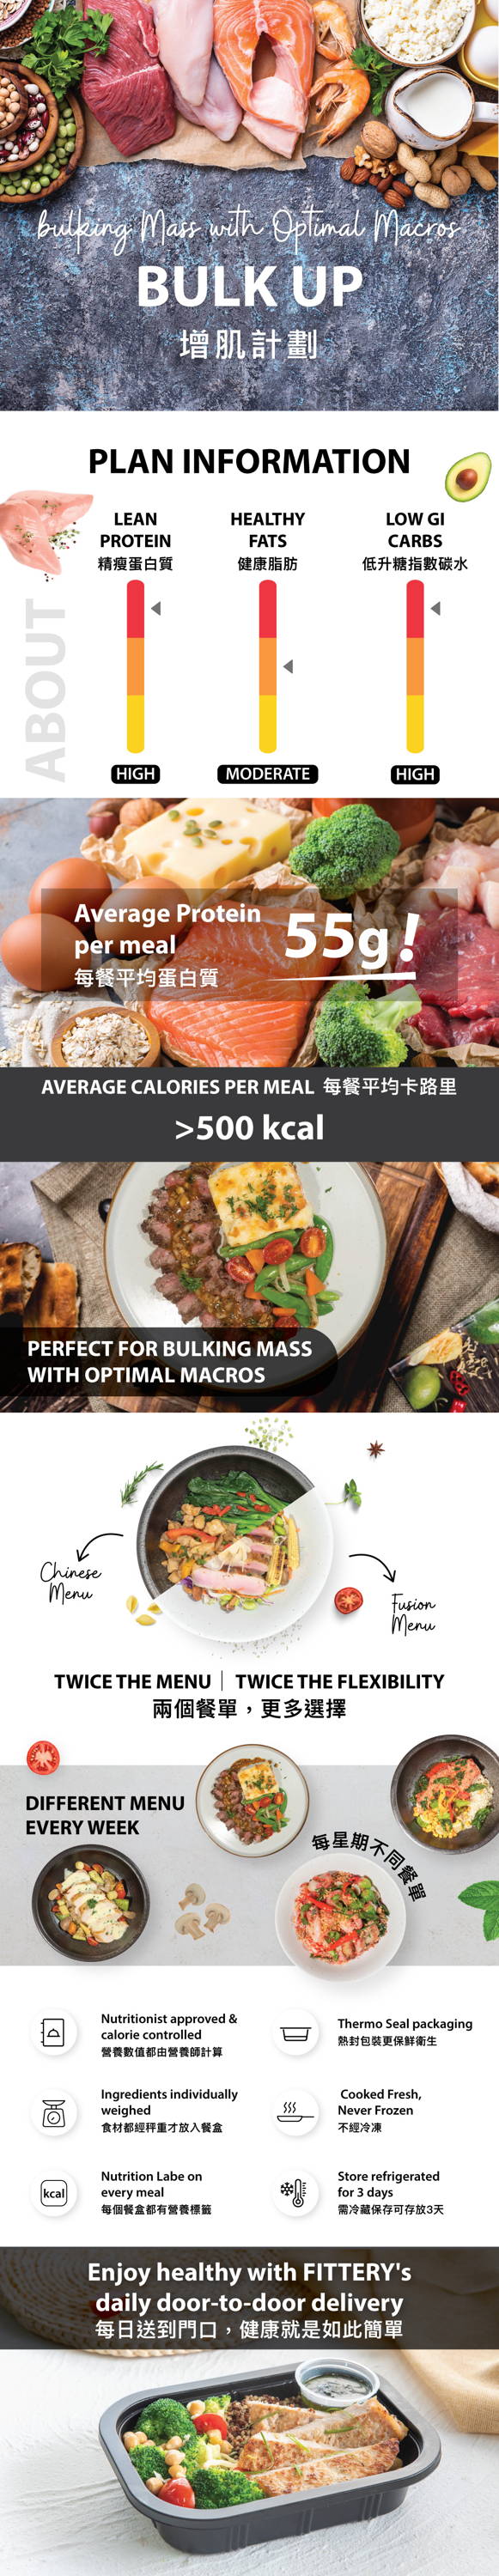 FITTERY Bulk Up Meal Plan - Perfect for bulking mass with optimal macros